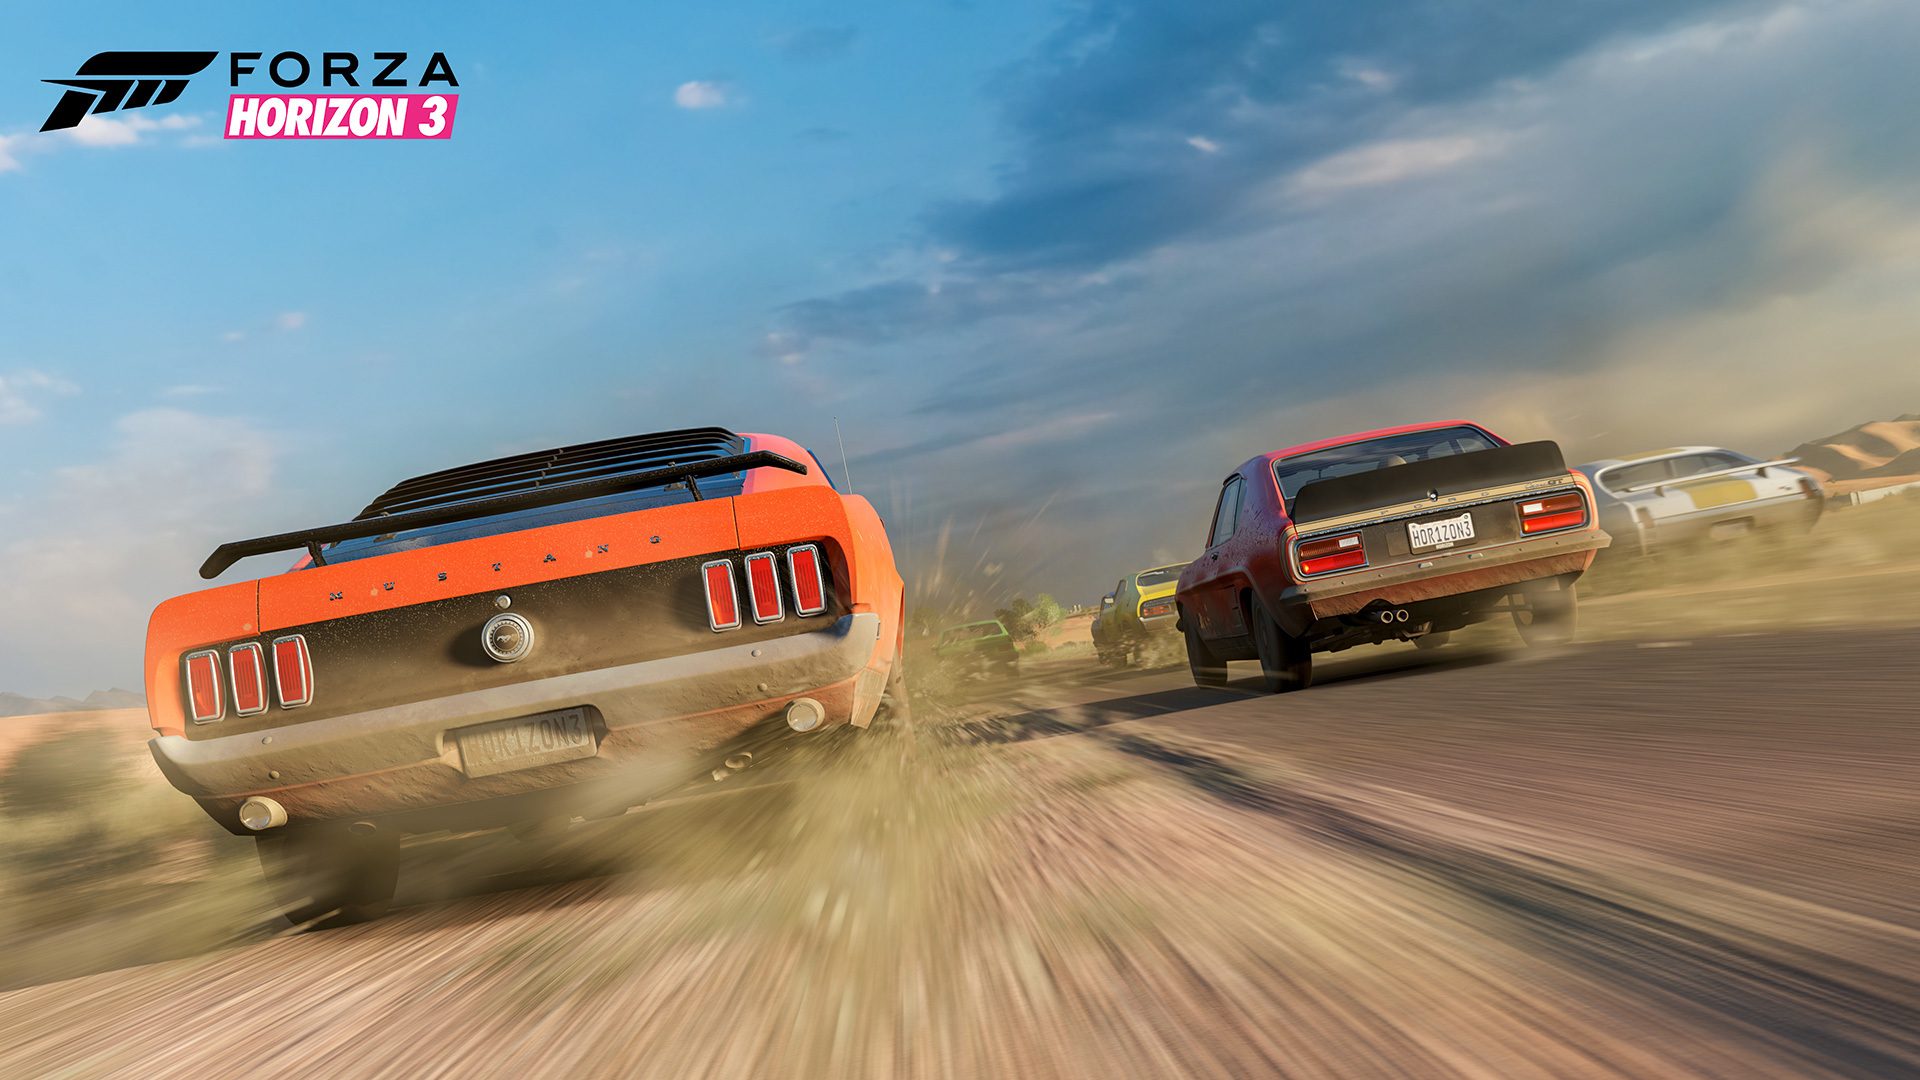 Forza Horizon 5 Is Now Available For Digital Pre-order And Pre